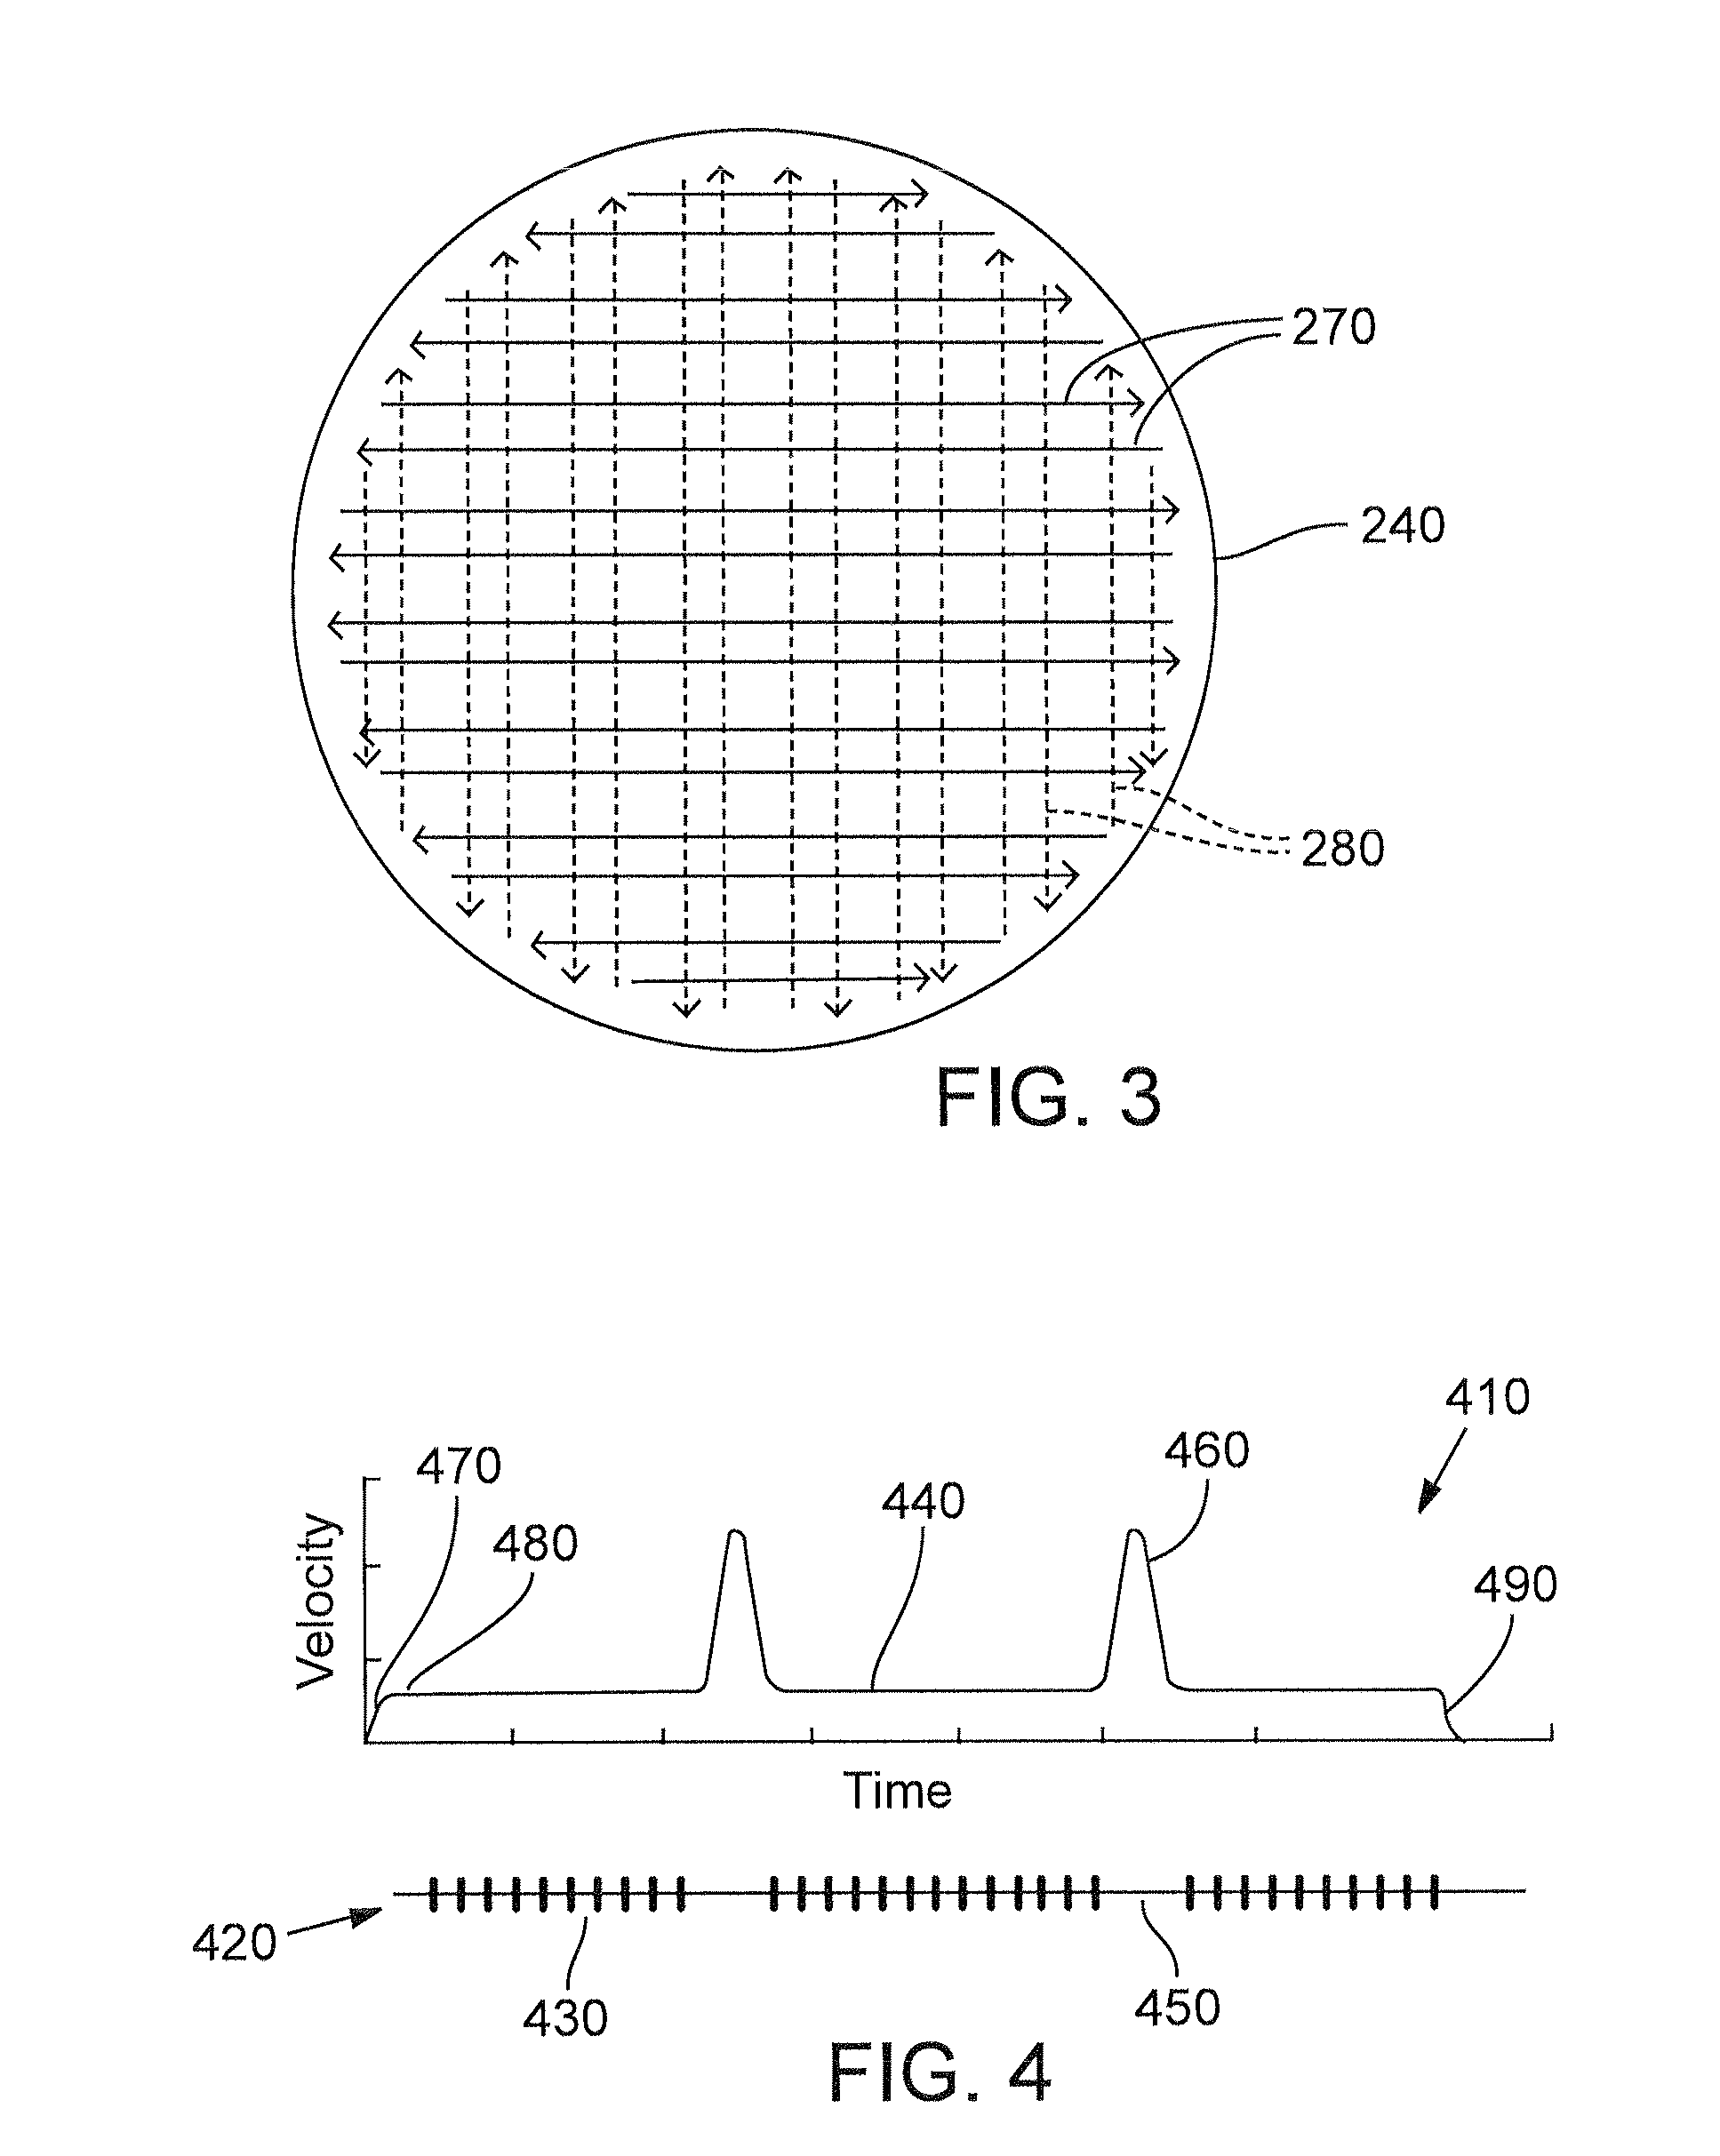 Reconfigurable semiconductor structure processing using multiple laser beam spots